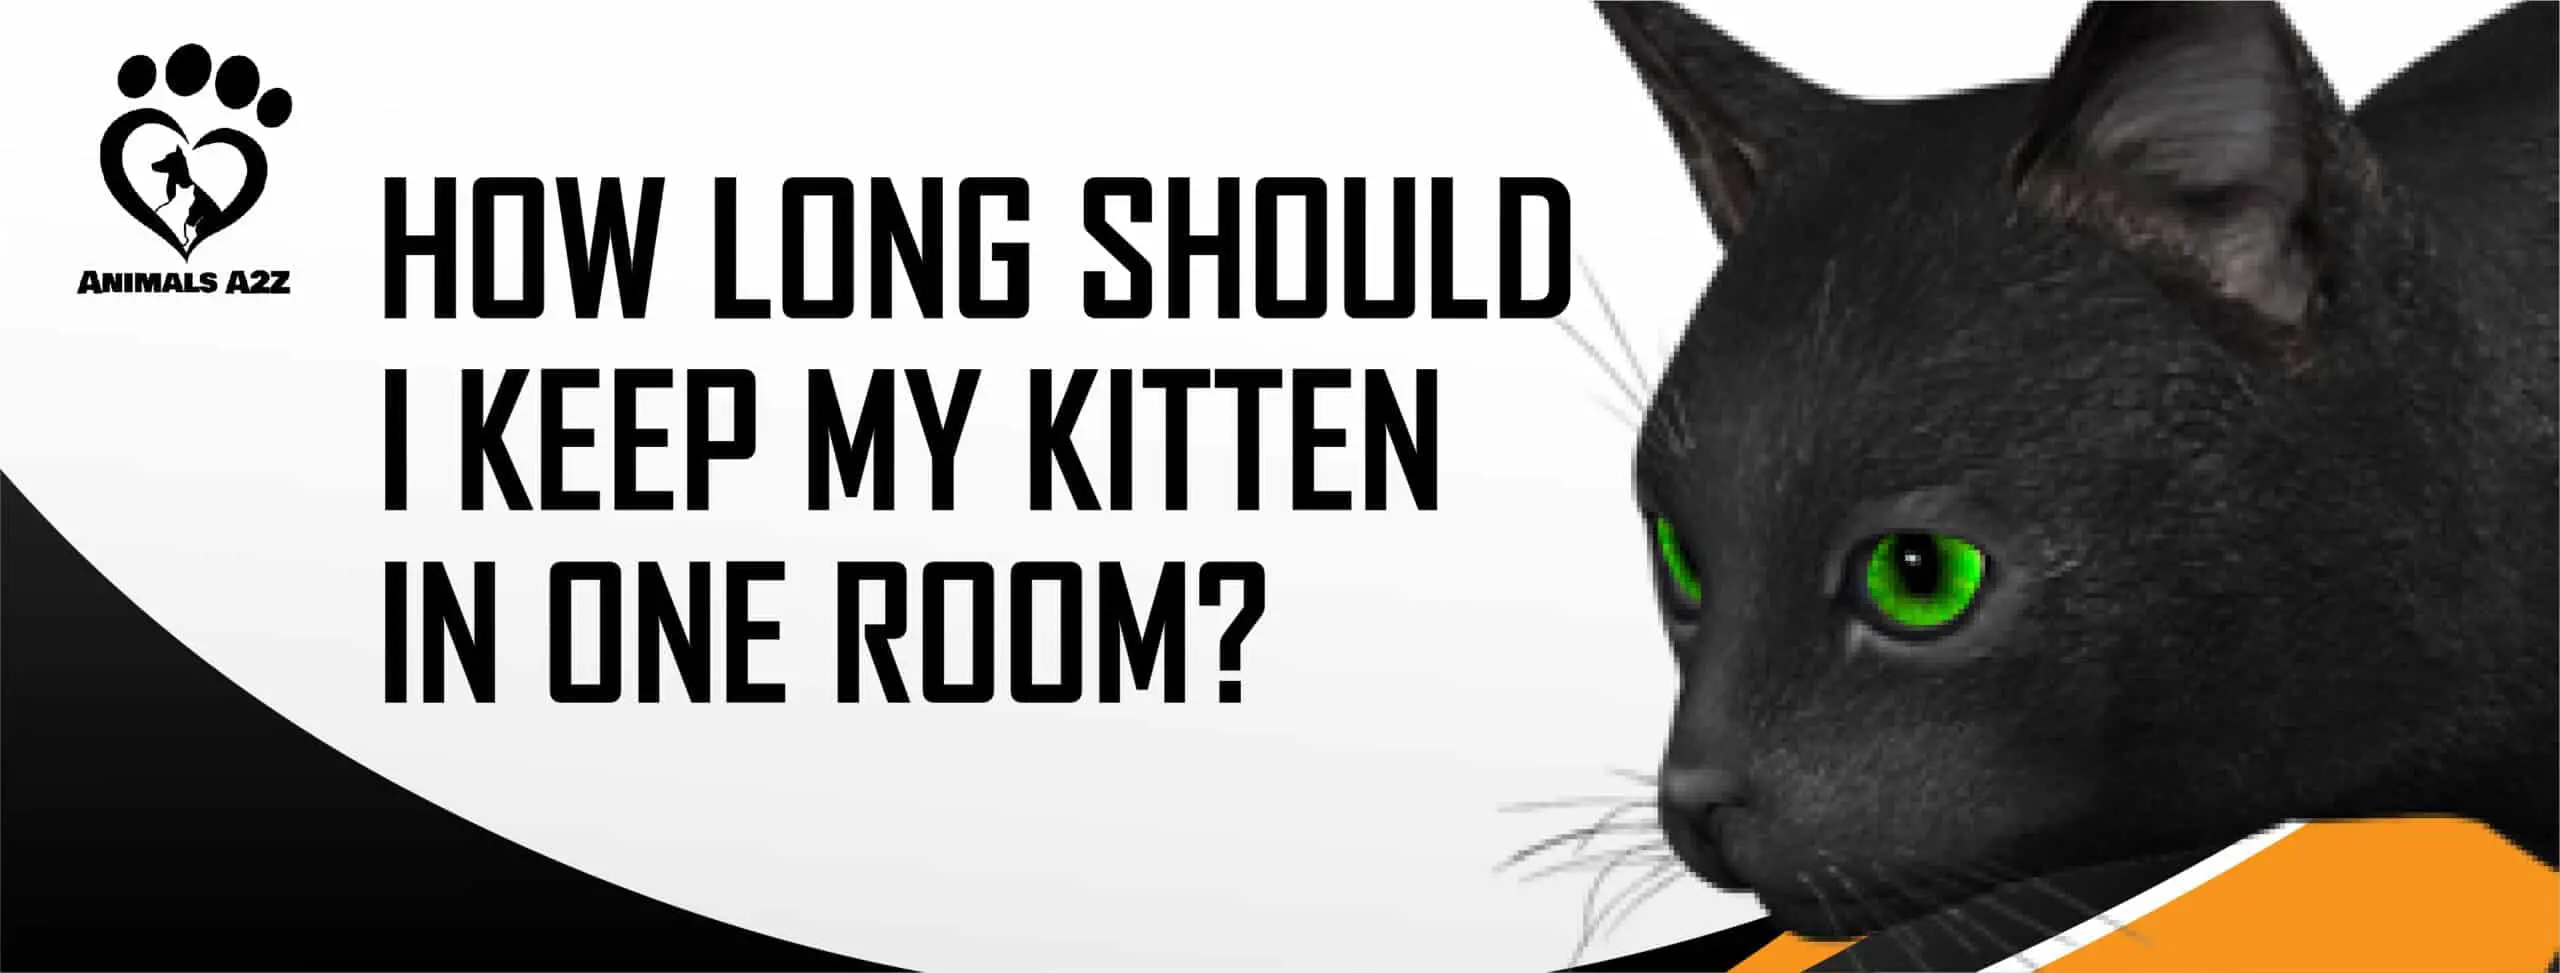 How long should I keep my kitten in one room